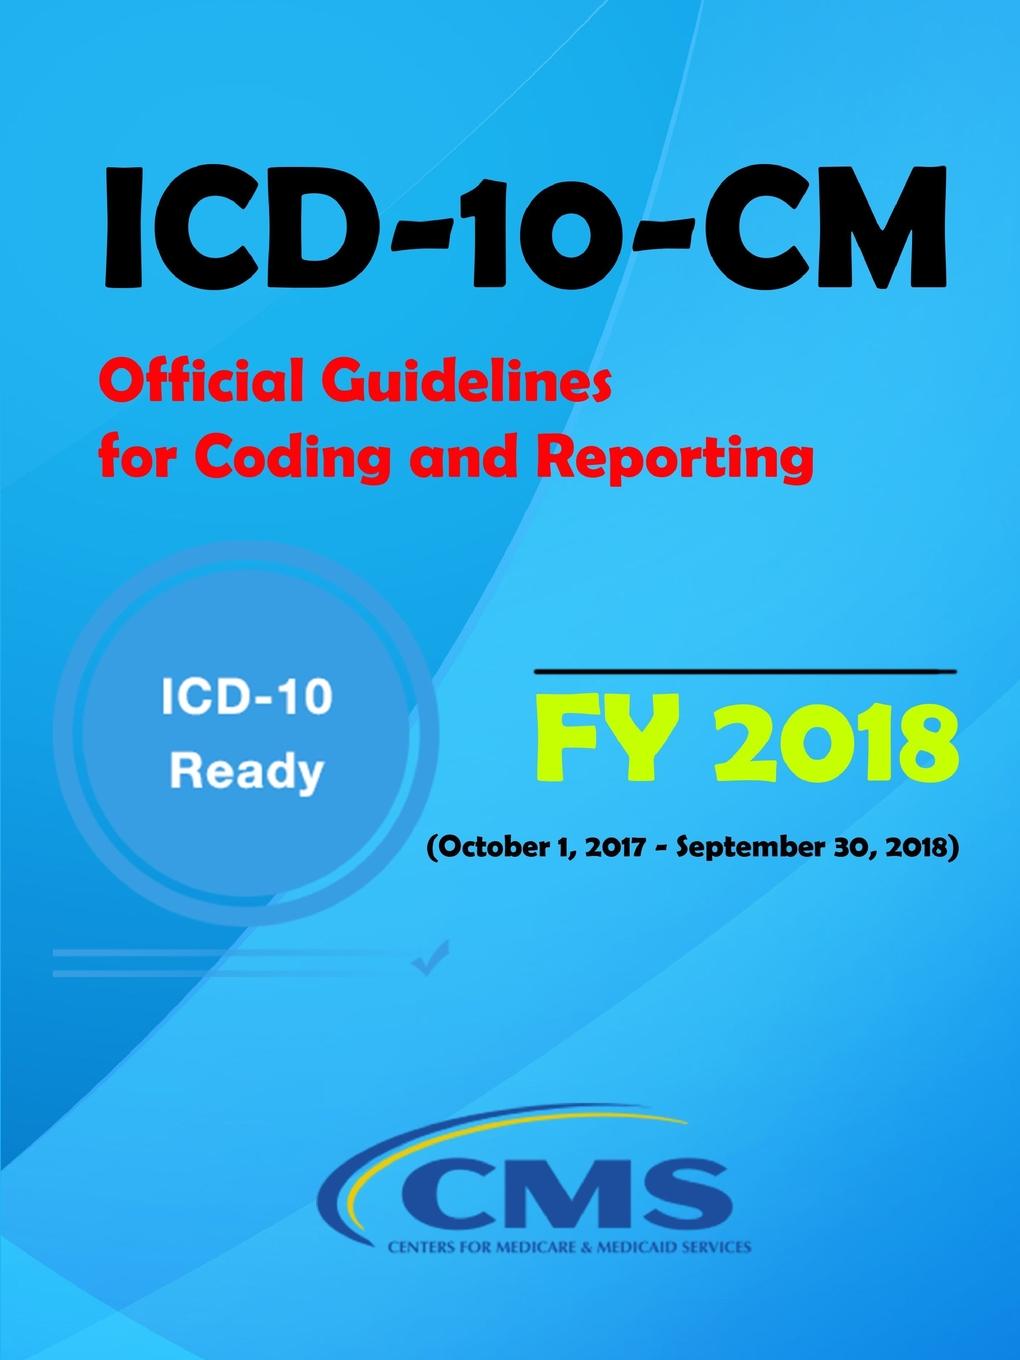 ICD-10-CM Official Guidelines for Coding and Reporting - FY 2018 (October 1, 2017 - September 30, 2018)